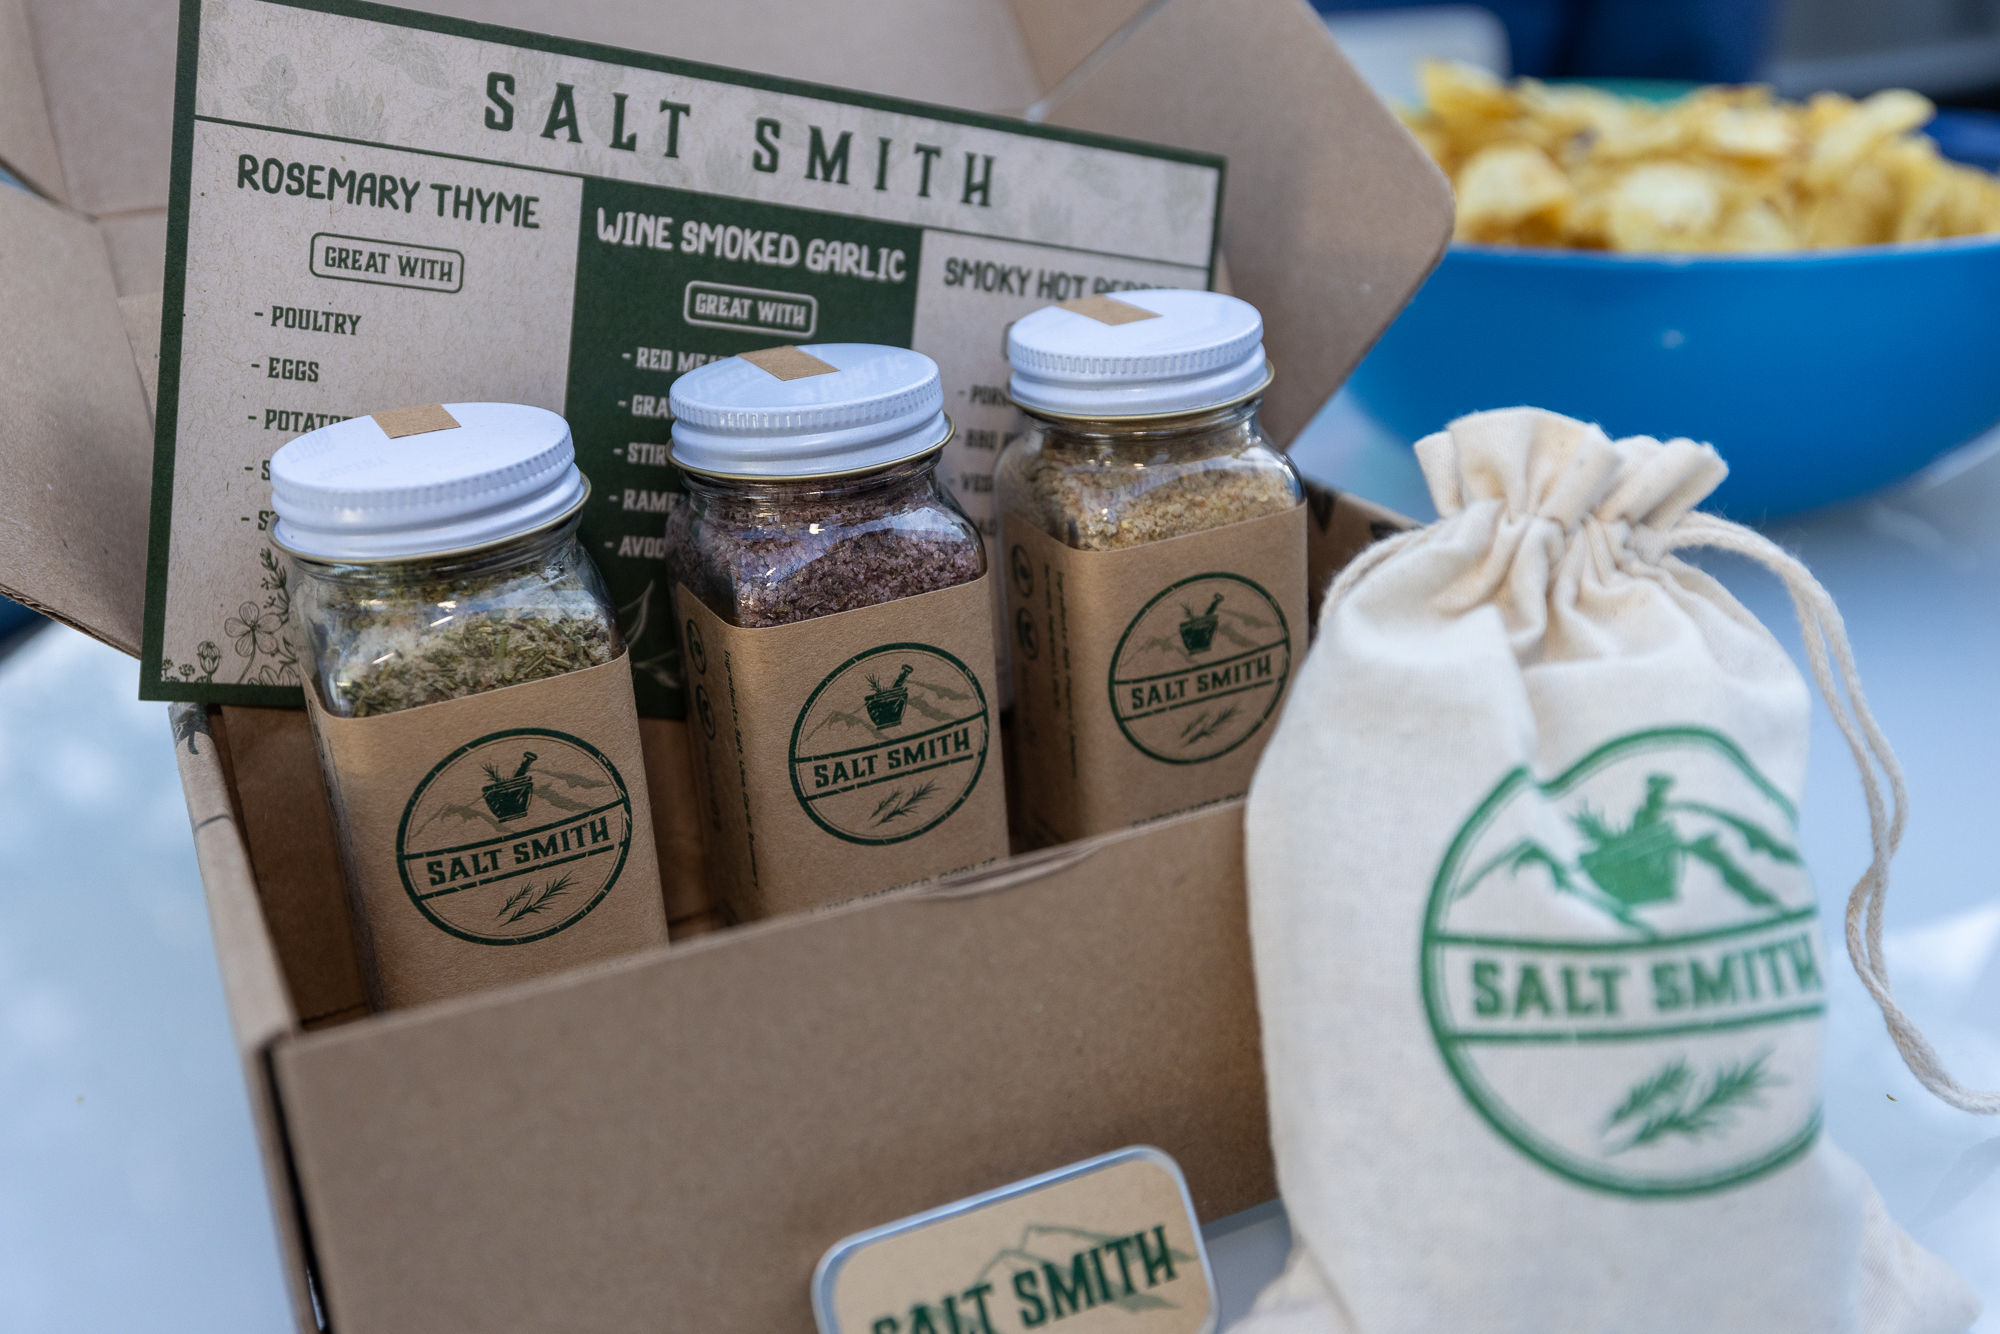 Salt Smith’s three primary salt blends are pictured together.